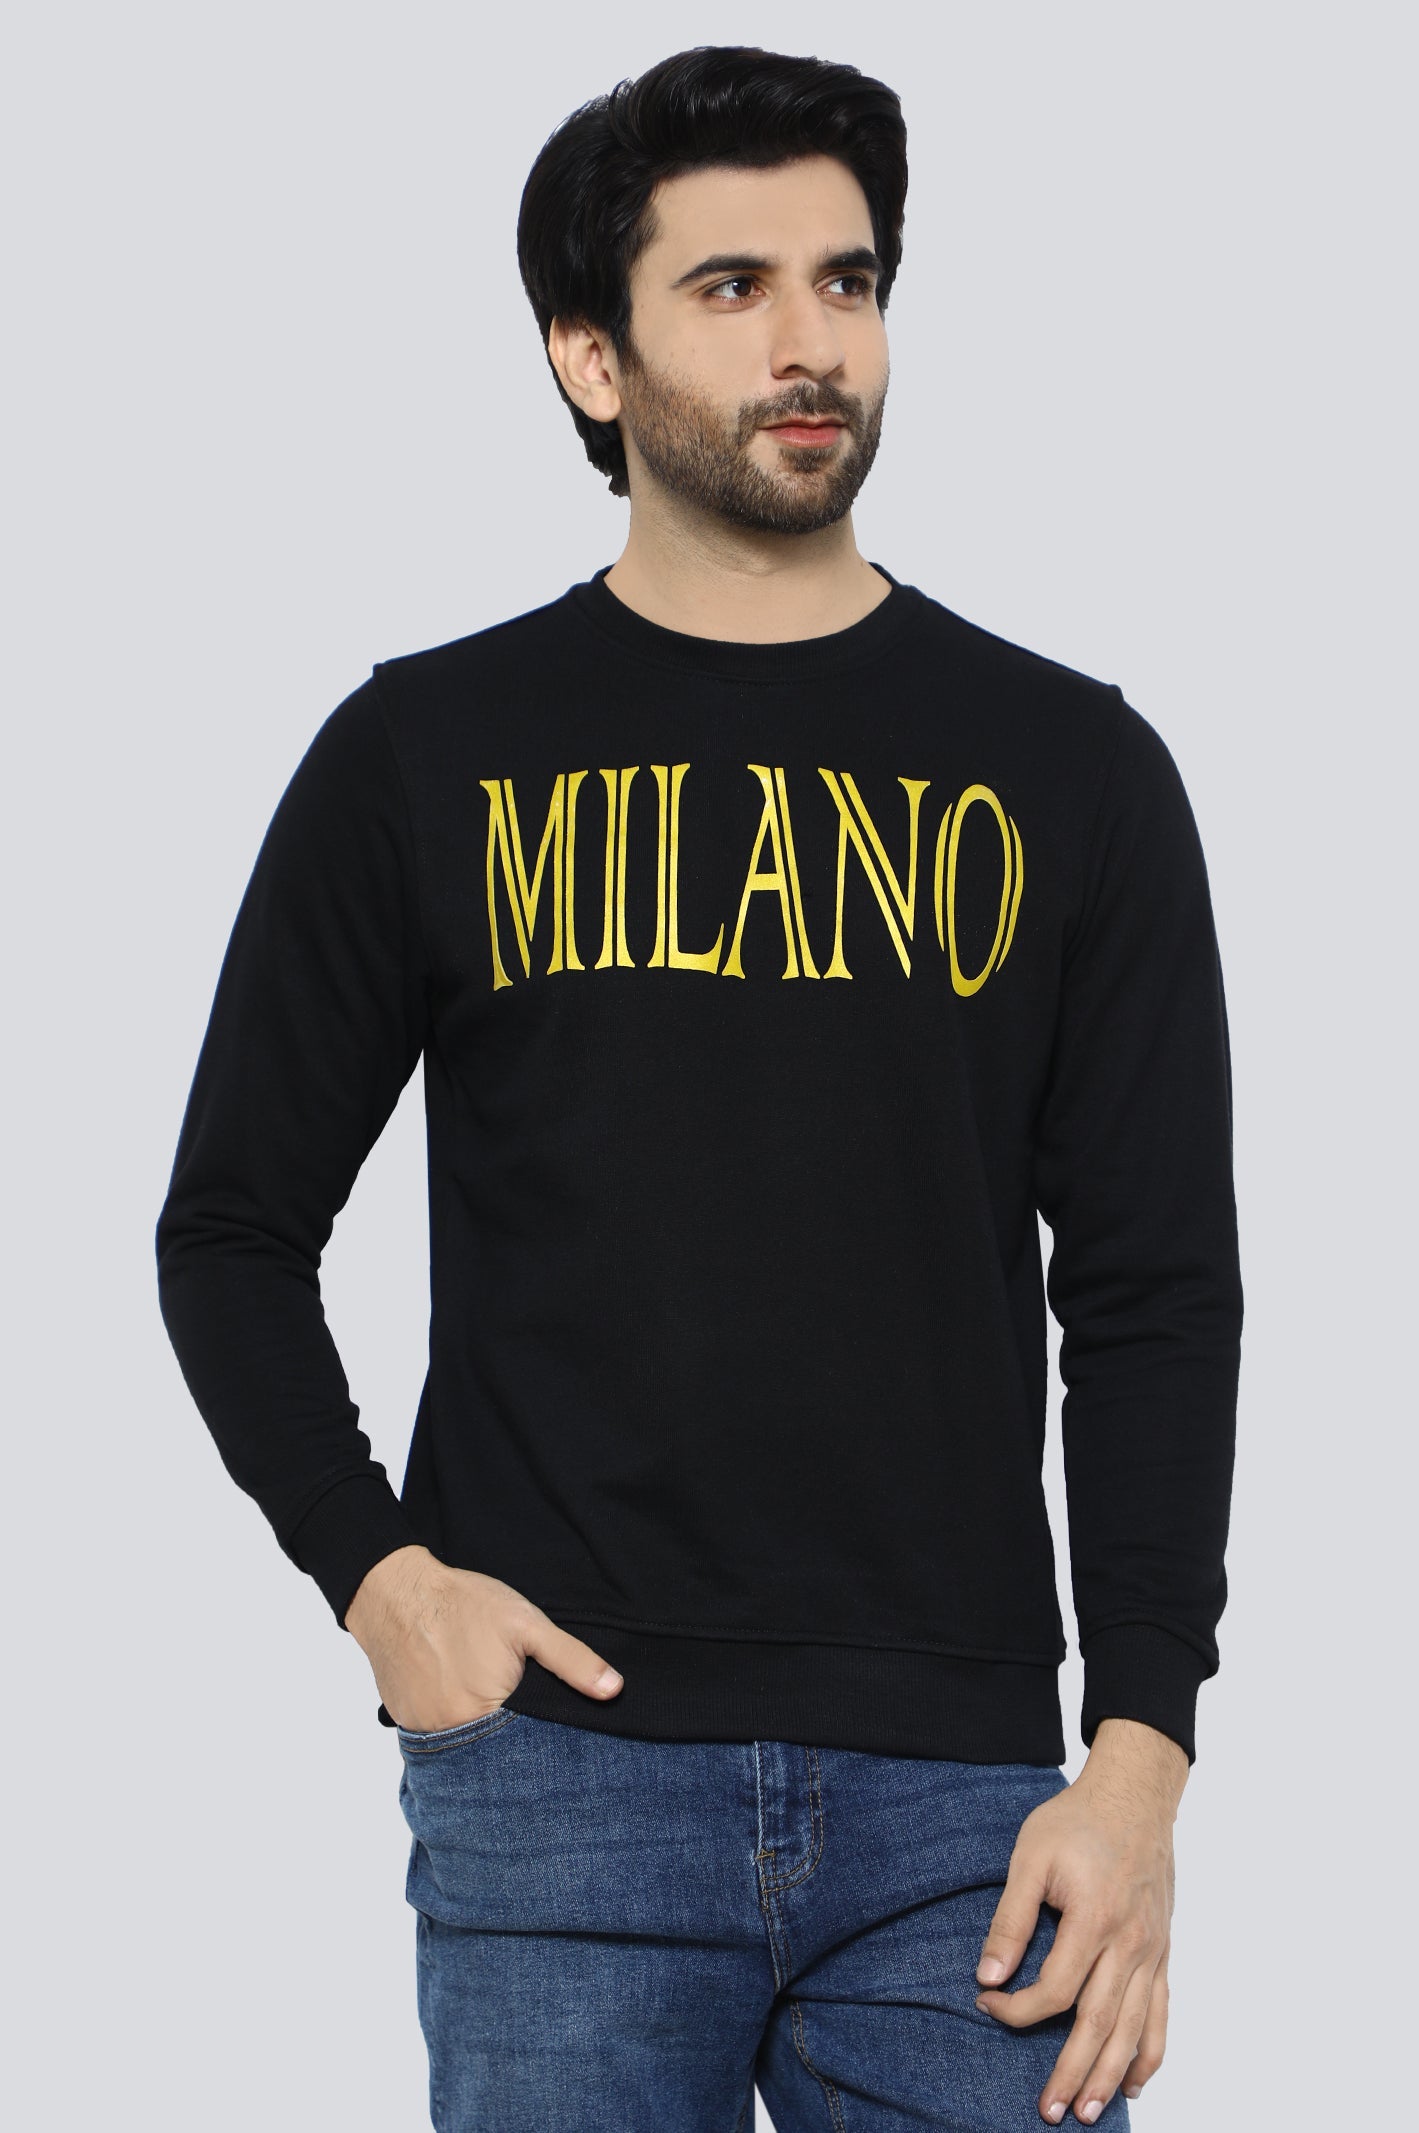 Sweat Shirt for Men's - Diners